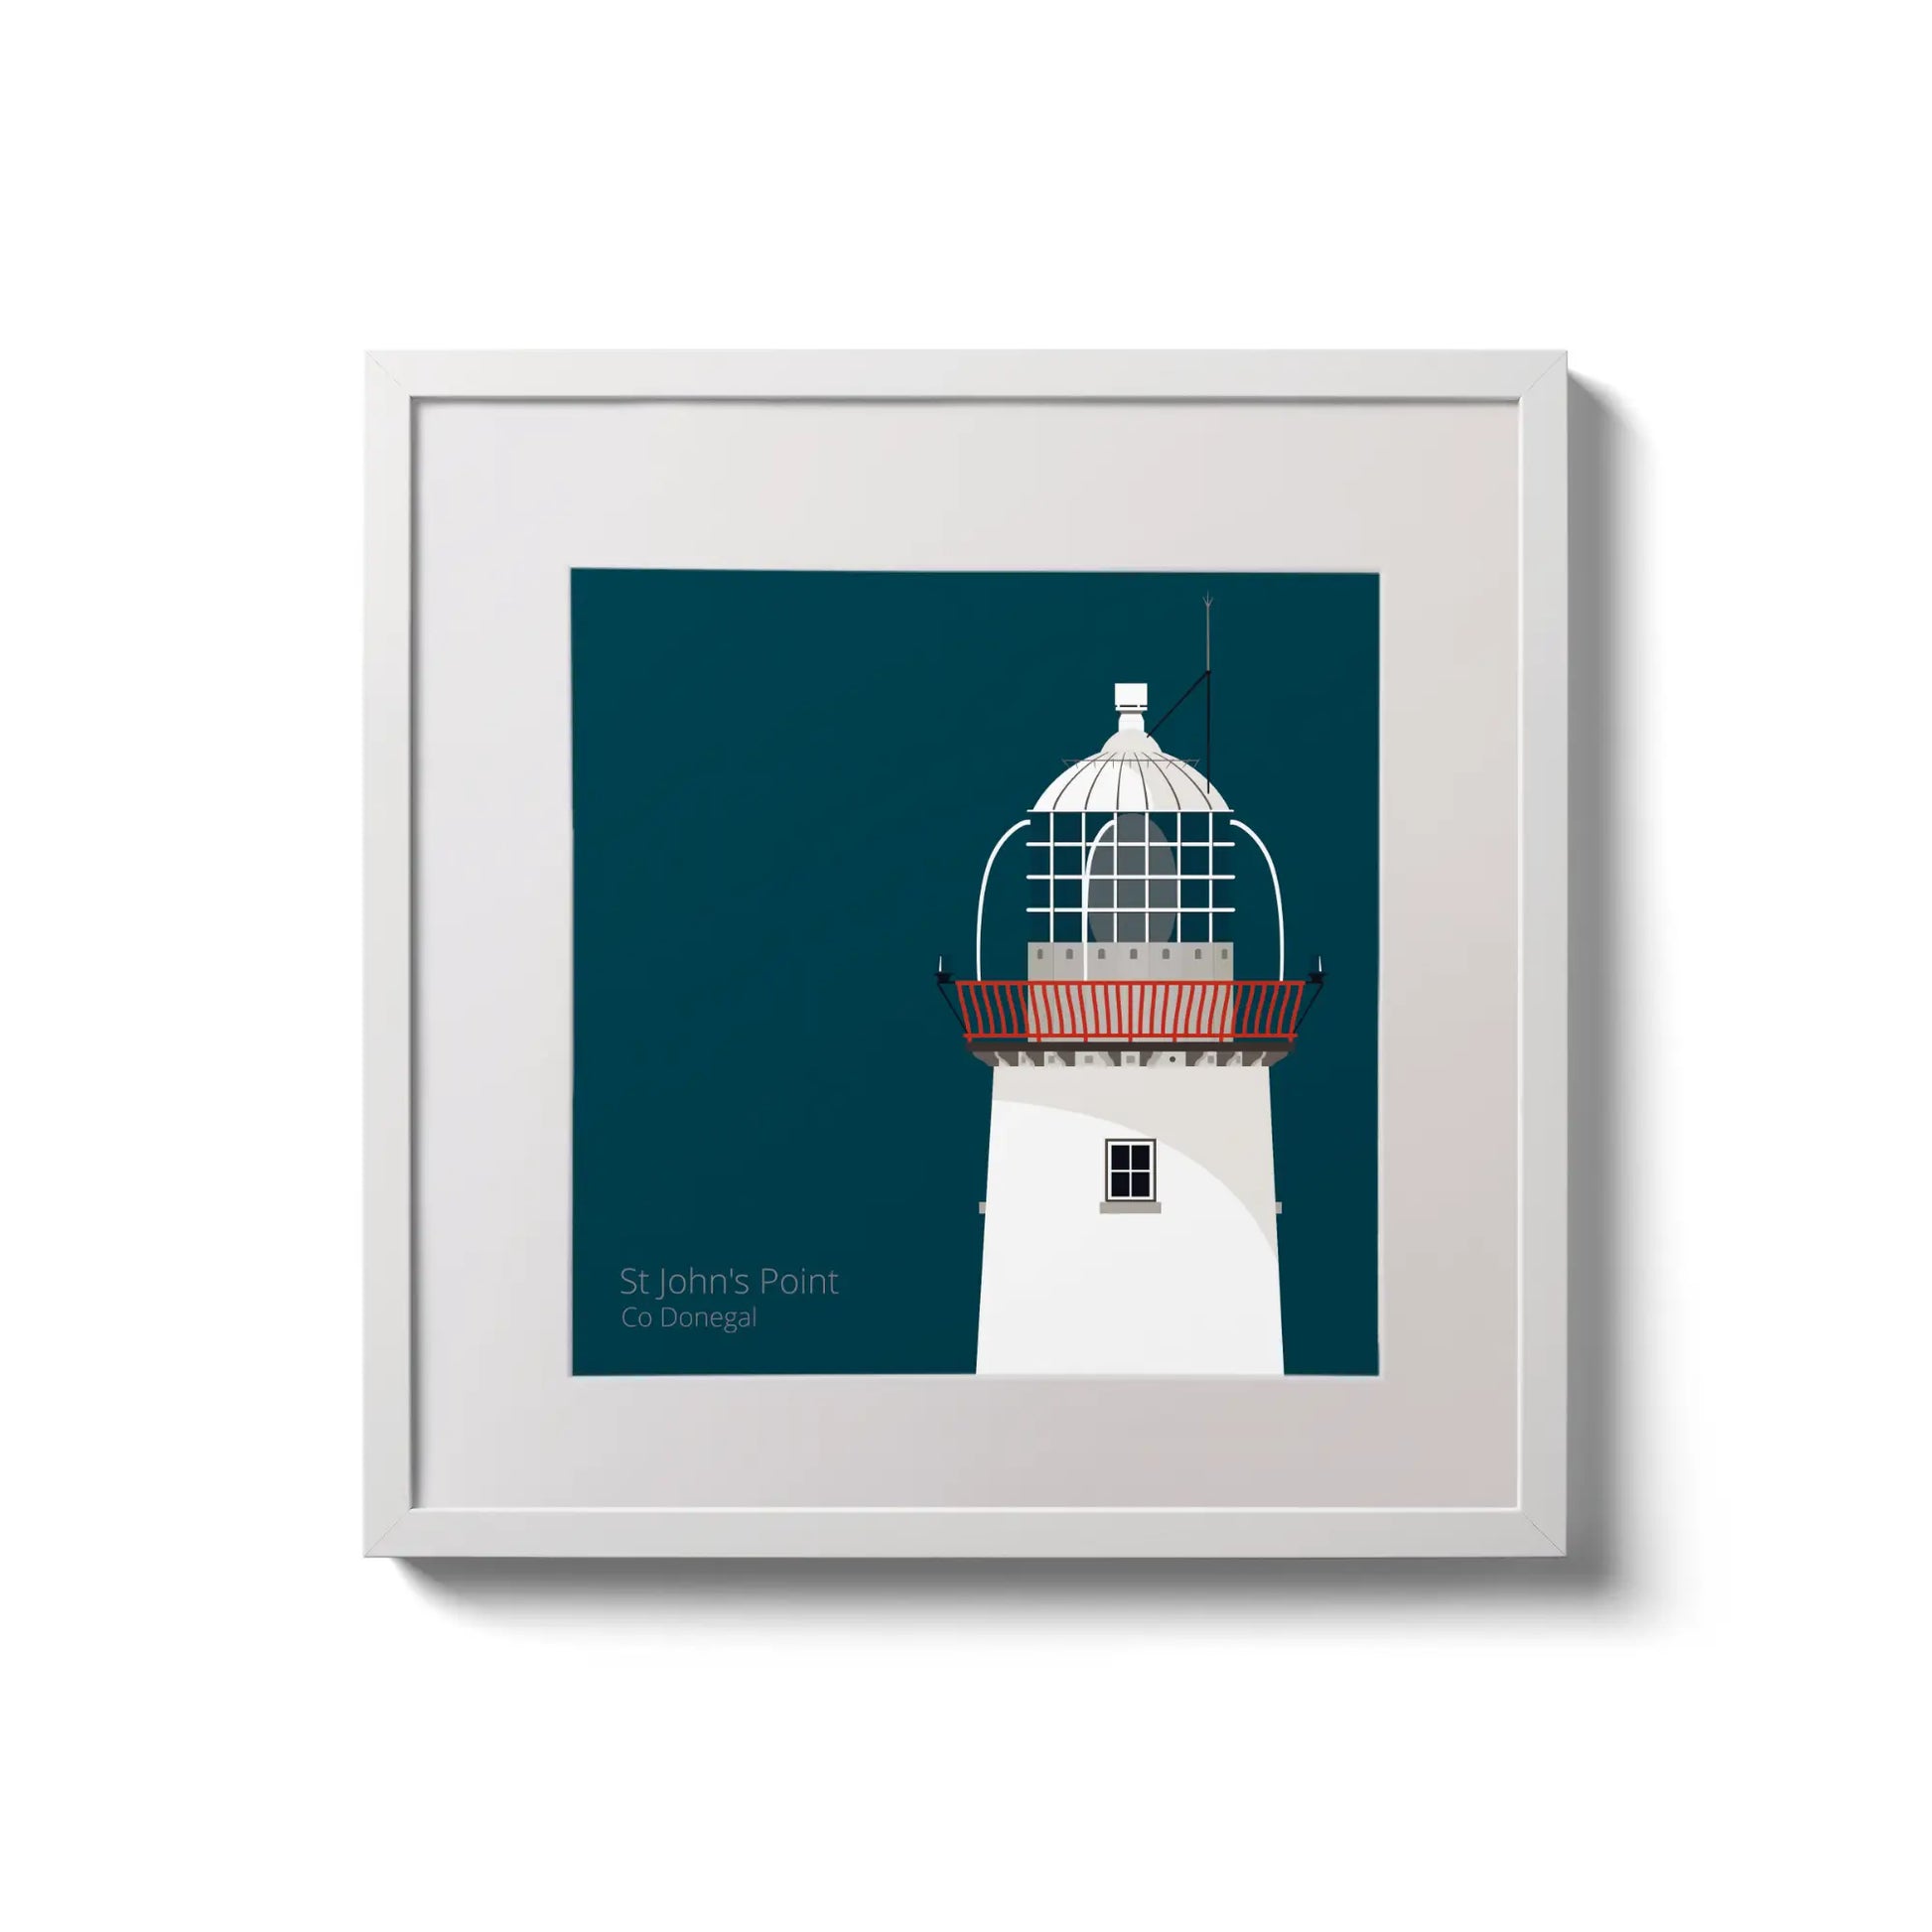 Illustration of St.John's (Donegal) lighthouse on a midnight blue background,  in a white square frame measuring 20x20cm.